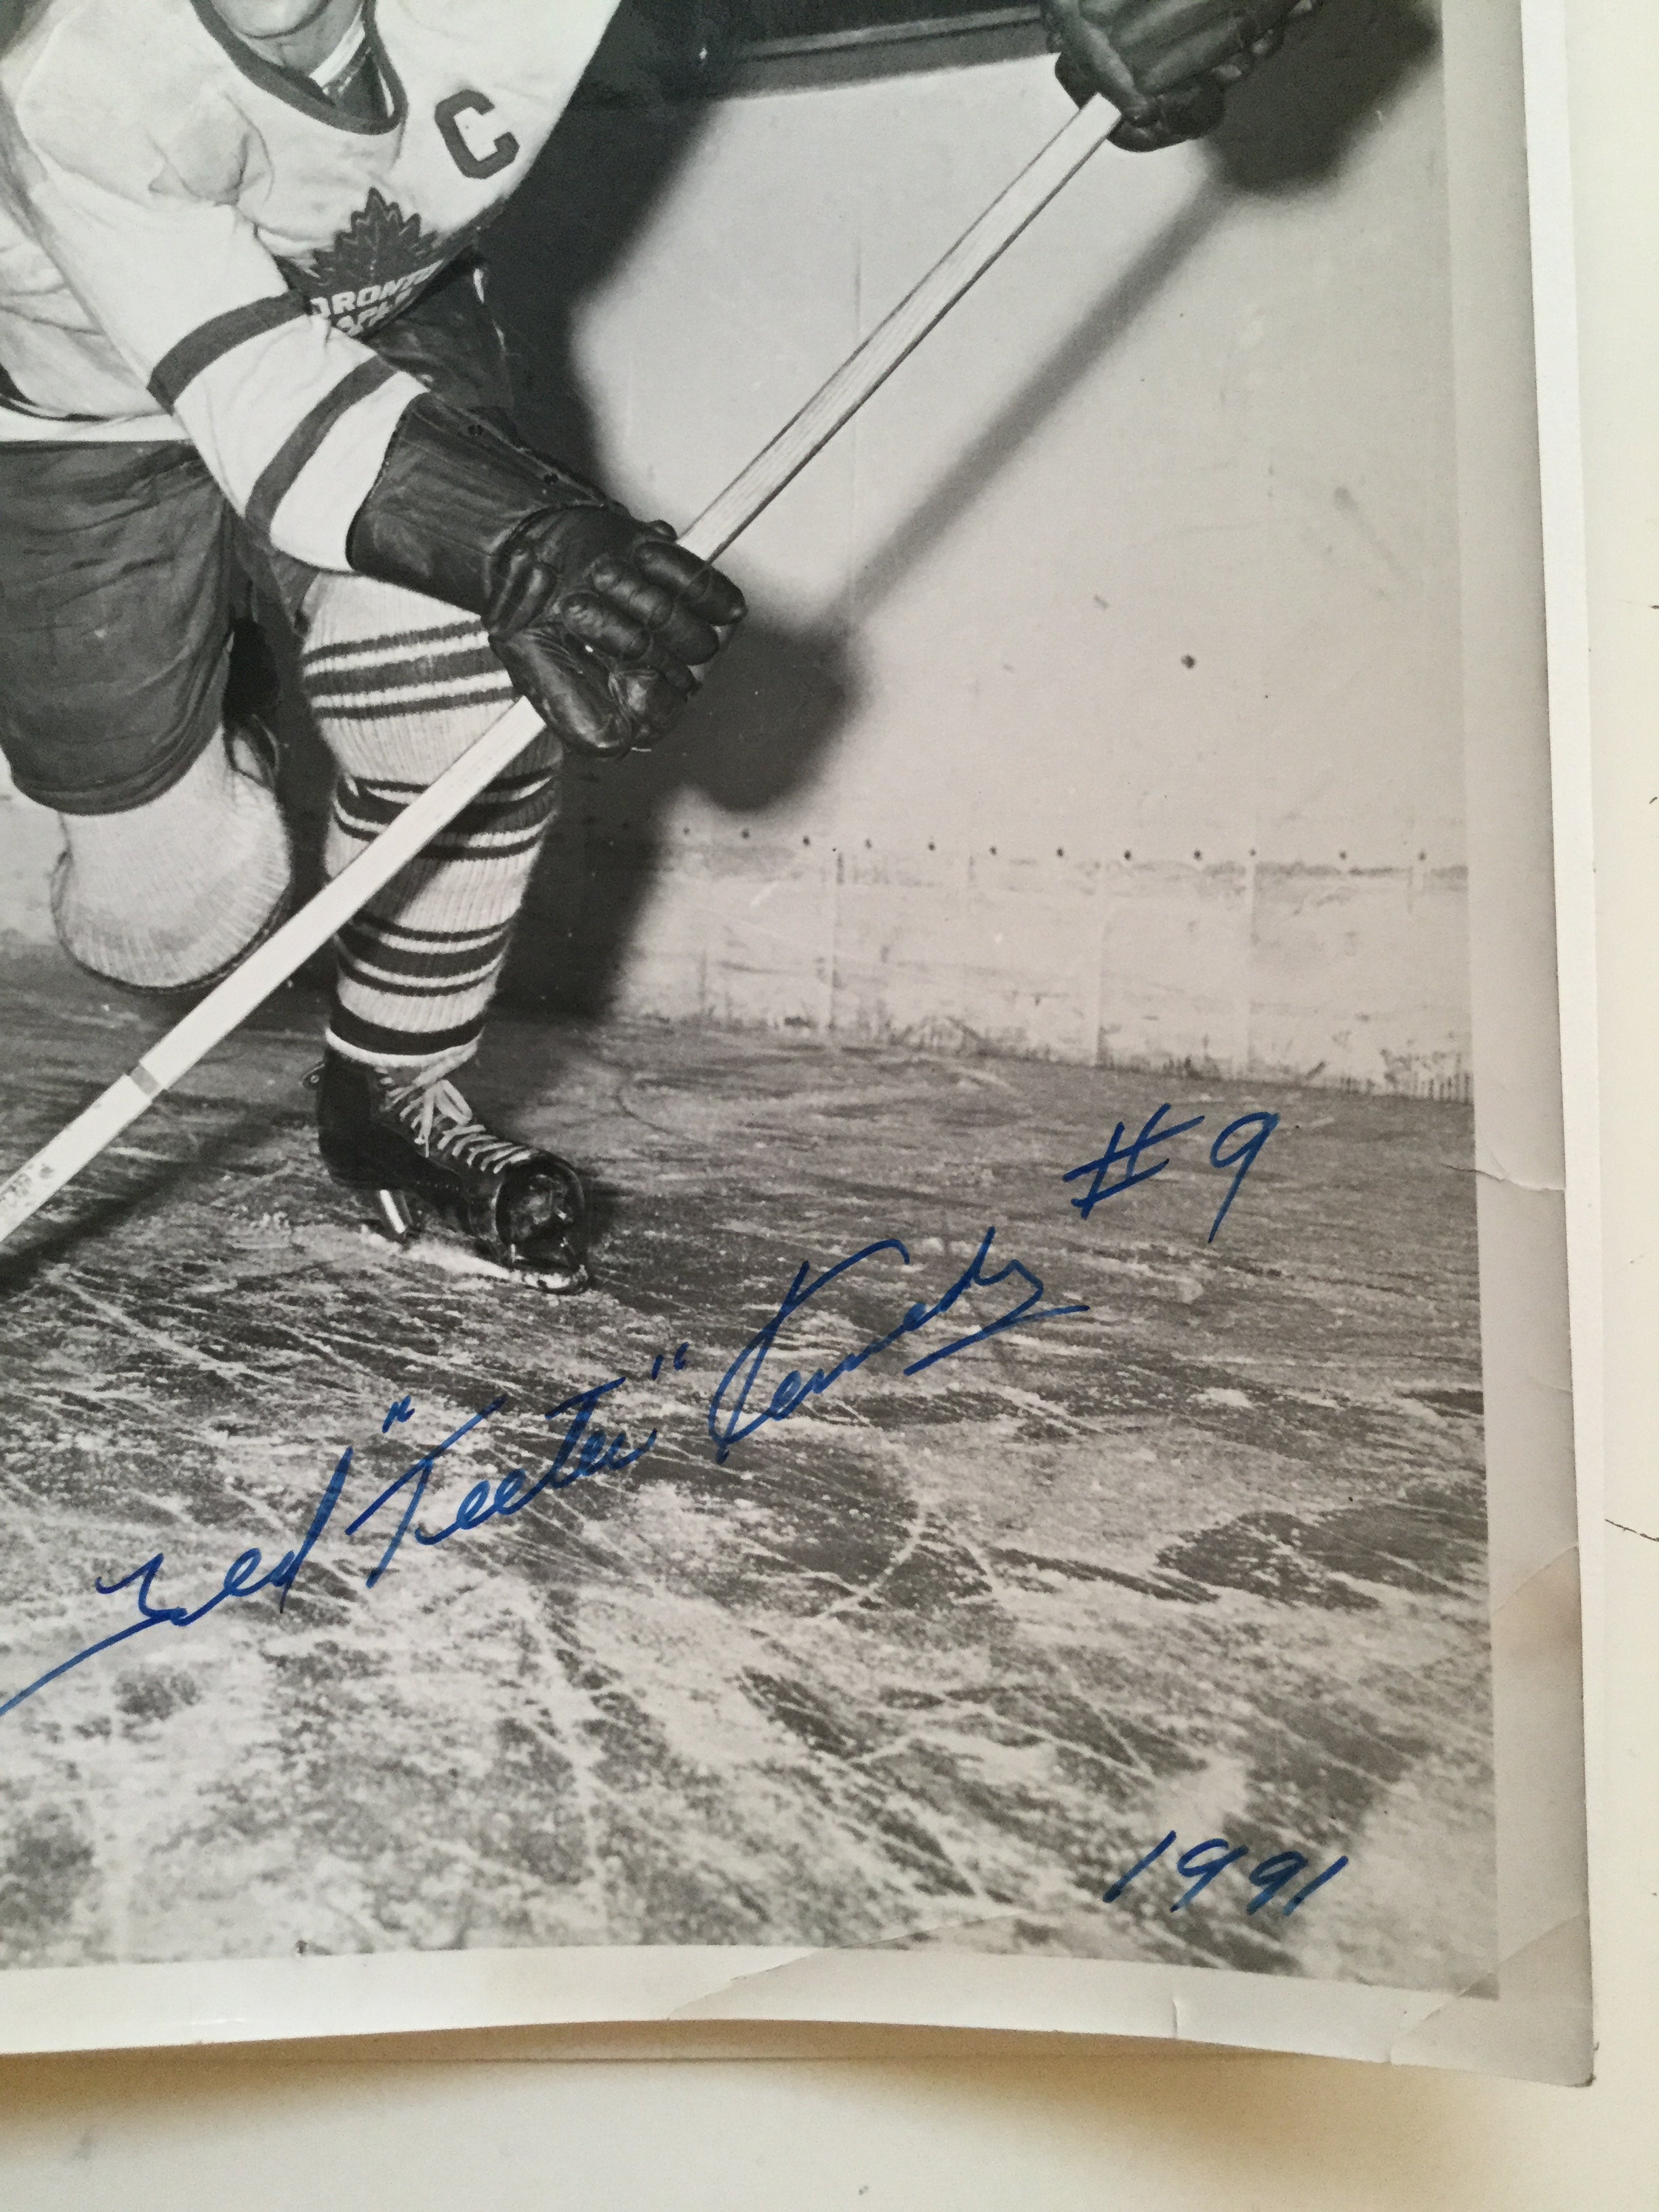 Ted Kennedy Toronto Maple Leafs hockey legend signed photo with COA